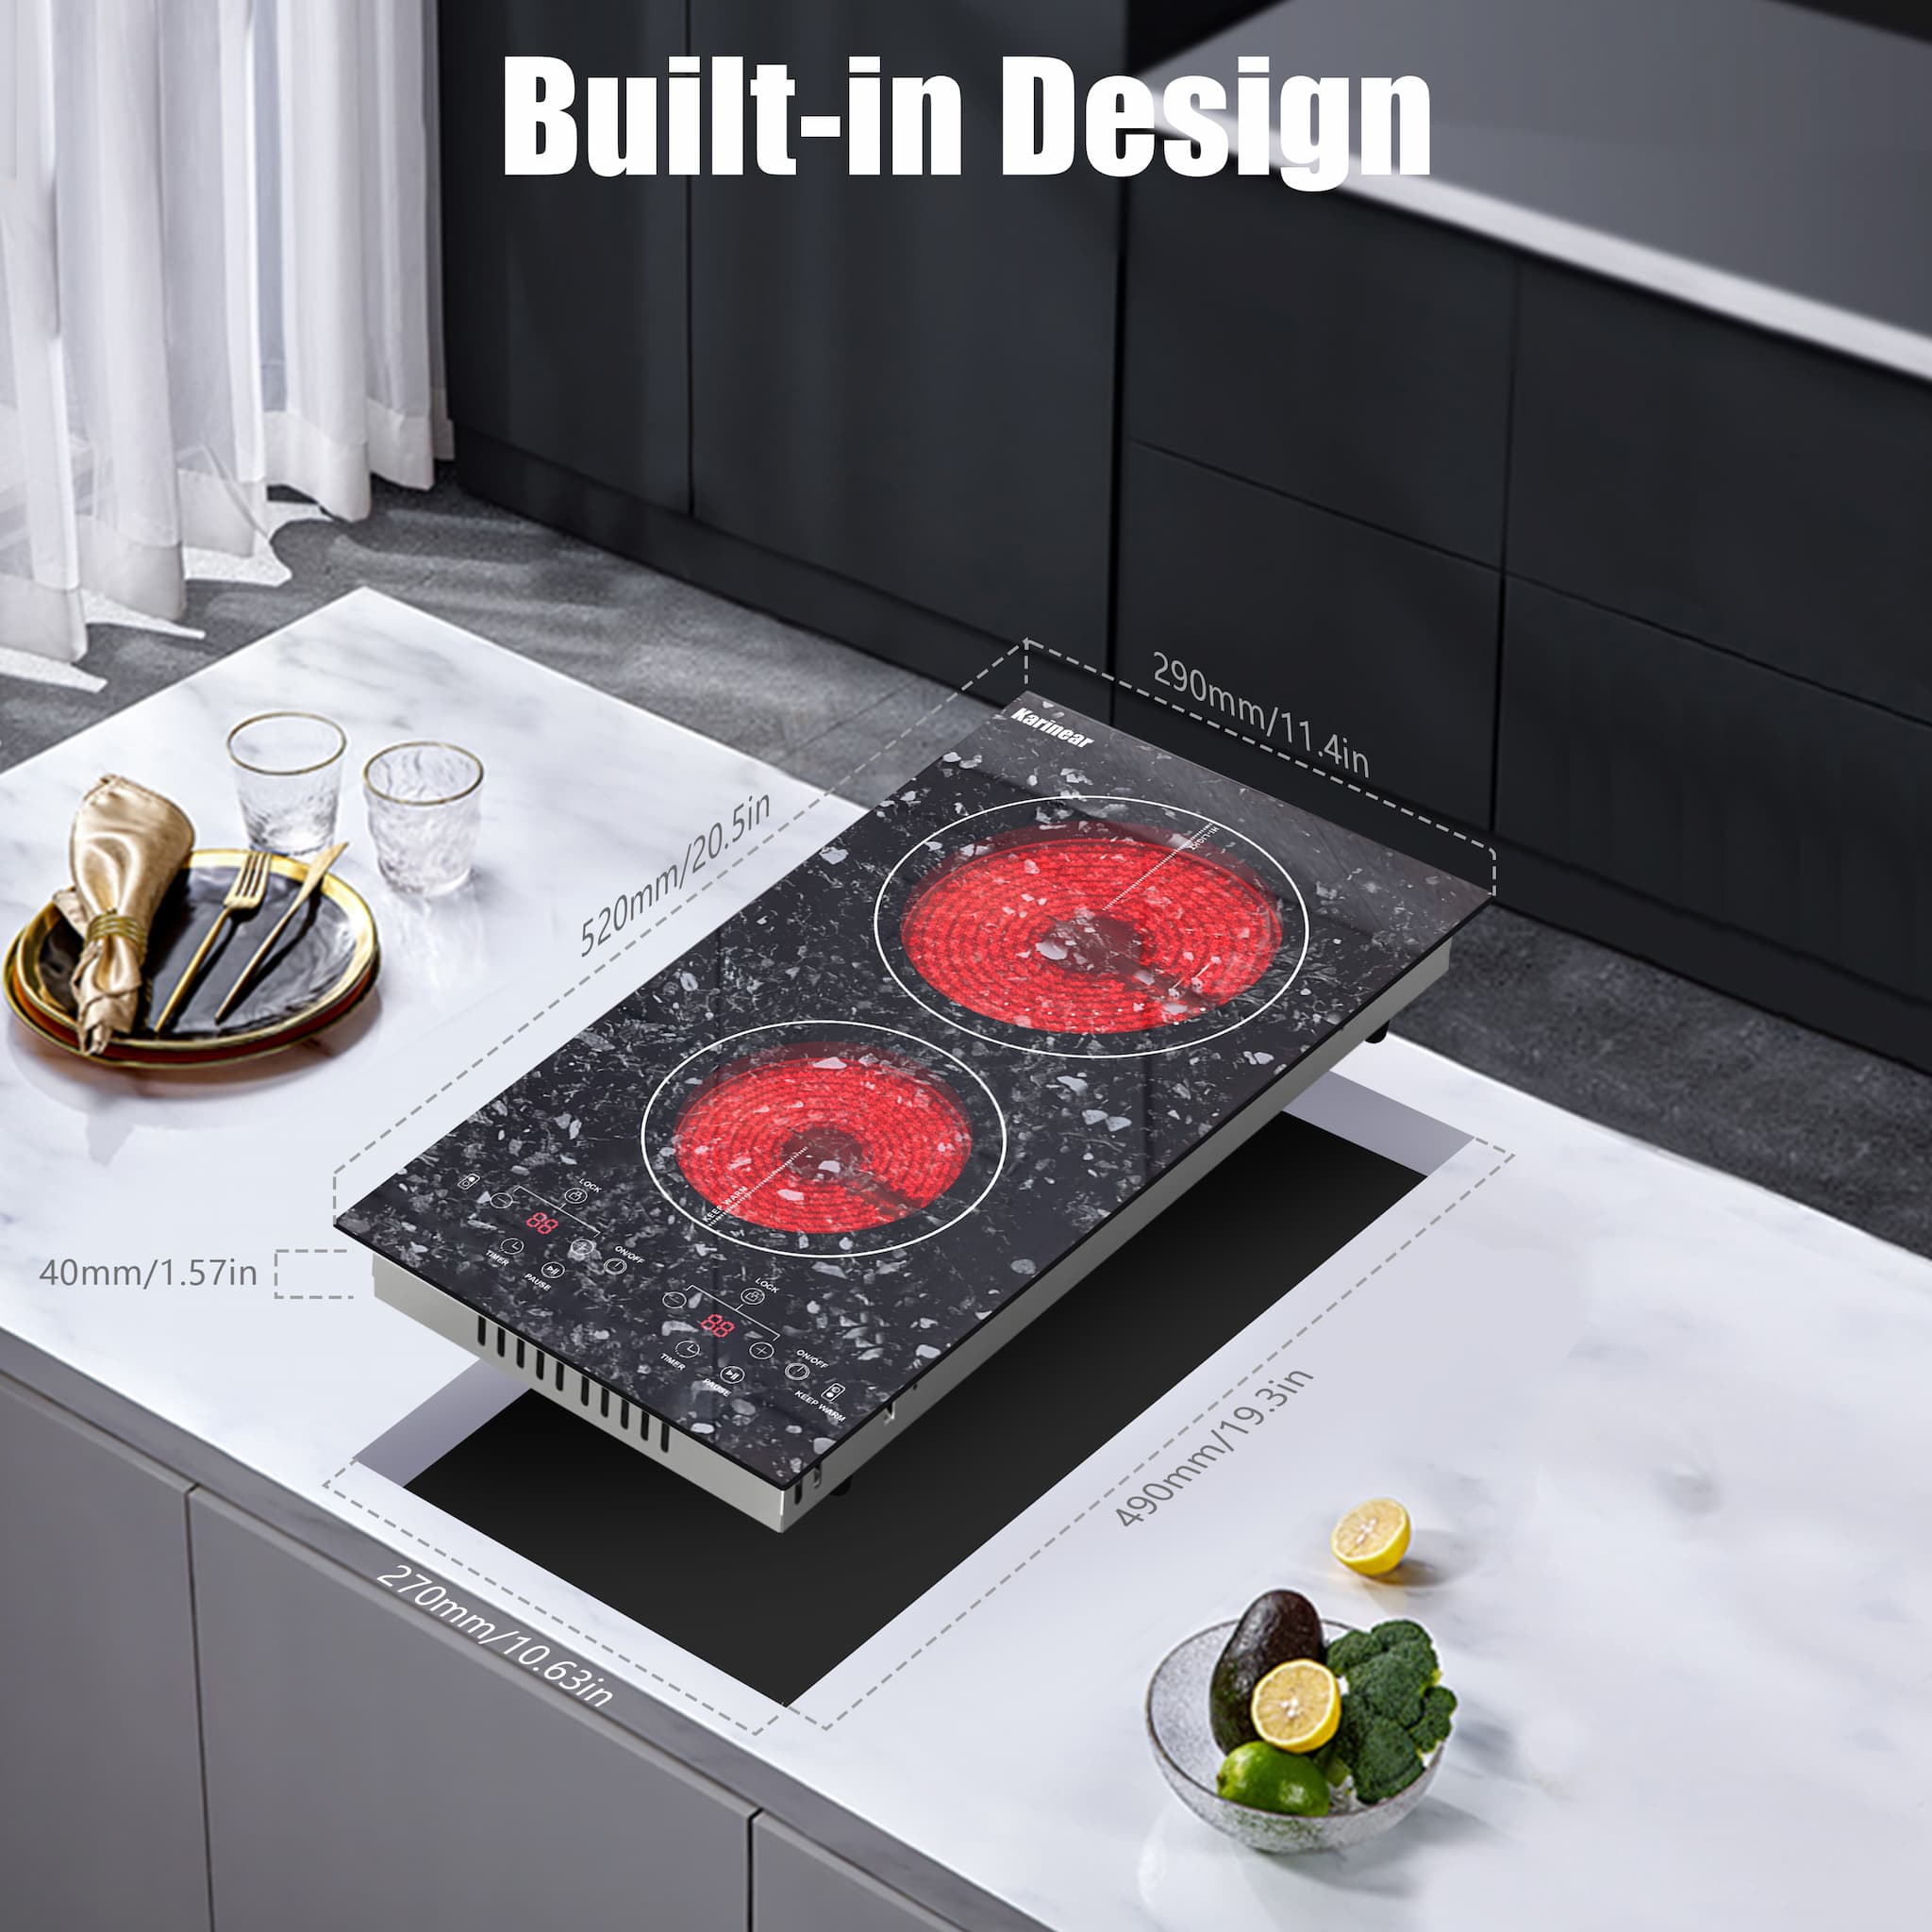 Karinear Electric Cooktop 24 Inch, 4 Burners Built-in Electric StoveTop  with Marble Patterned Surface, Ceramic Cooktop with Child Lock, Timer,  Residual Heat Indicator, 220-240v Hard Wired, Wiring Required(LH07)